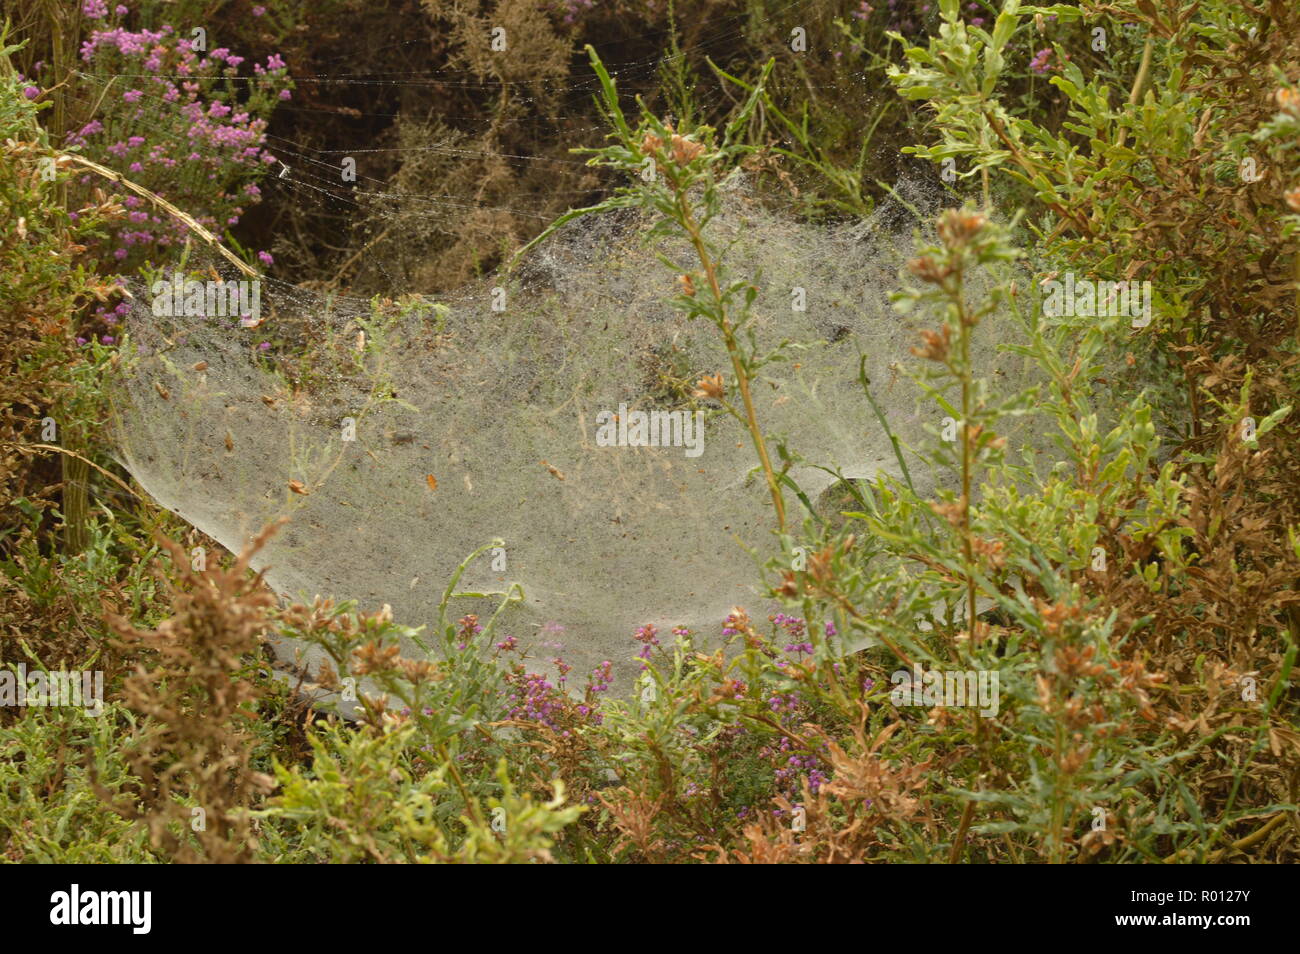 Spider Webs Covered By The Morning Dew In Rebedul. Nature, Animals, Landscapes, Travel. August 2, 2018. Rebedul, Lugo, Galicia, Spain. Stock Photo